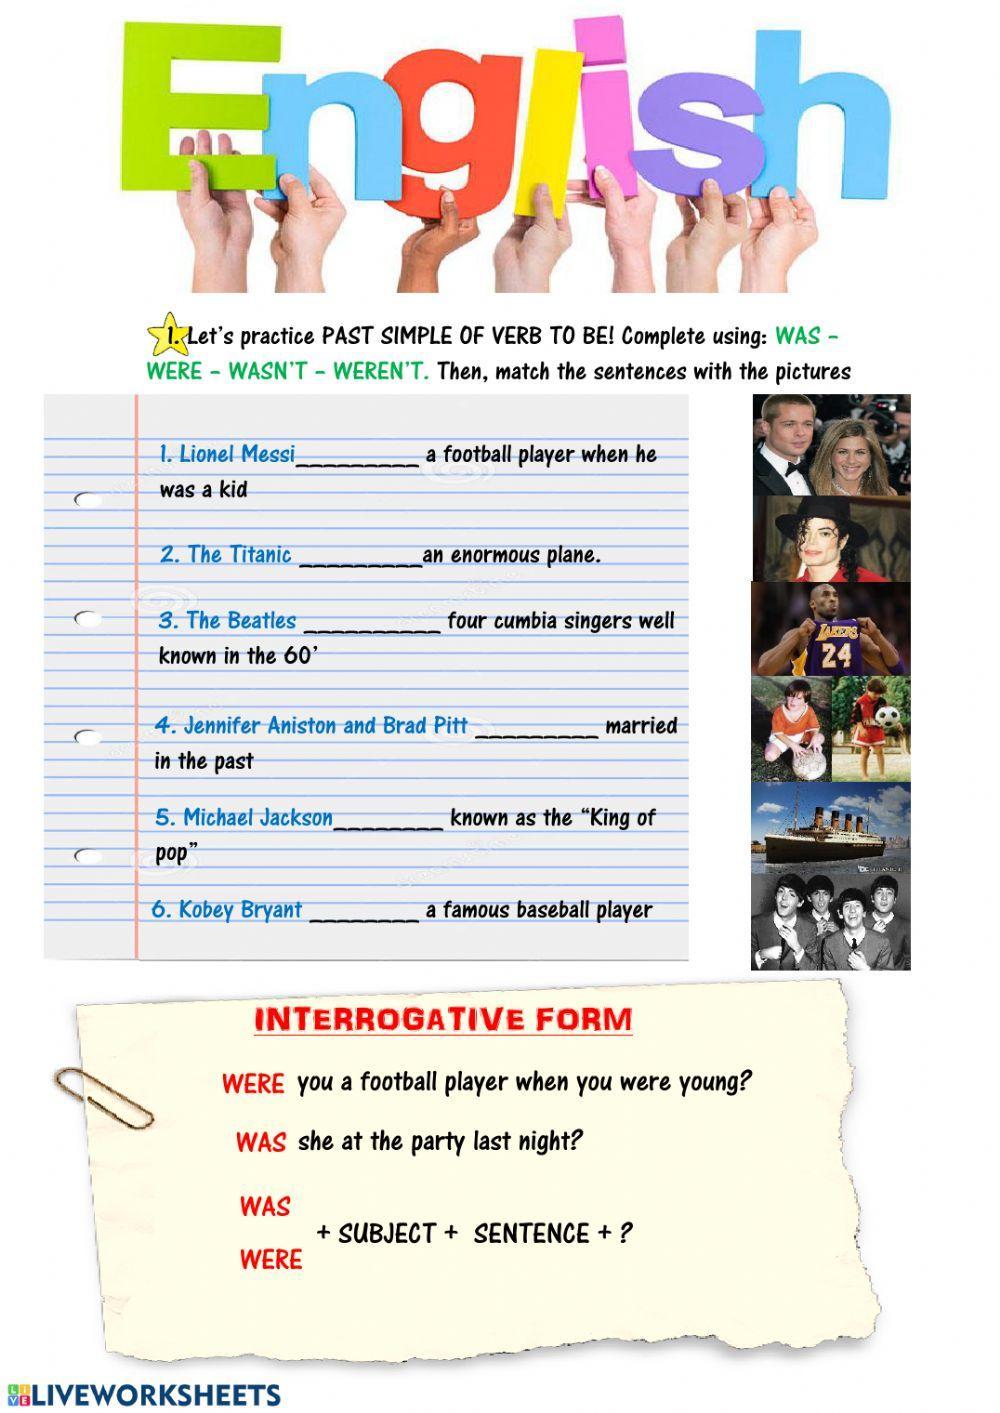 Past simple of verb to be (interrogative)